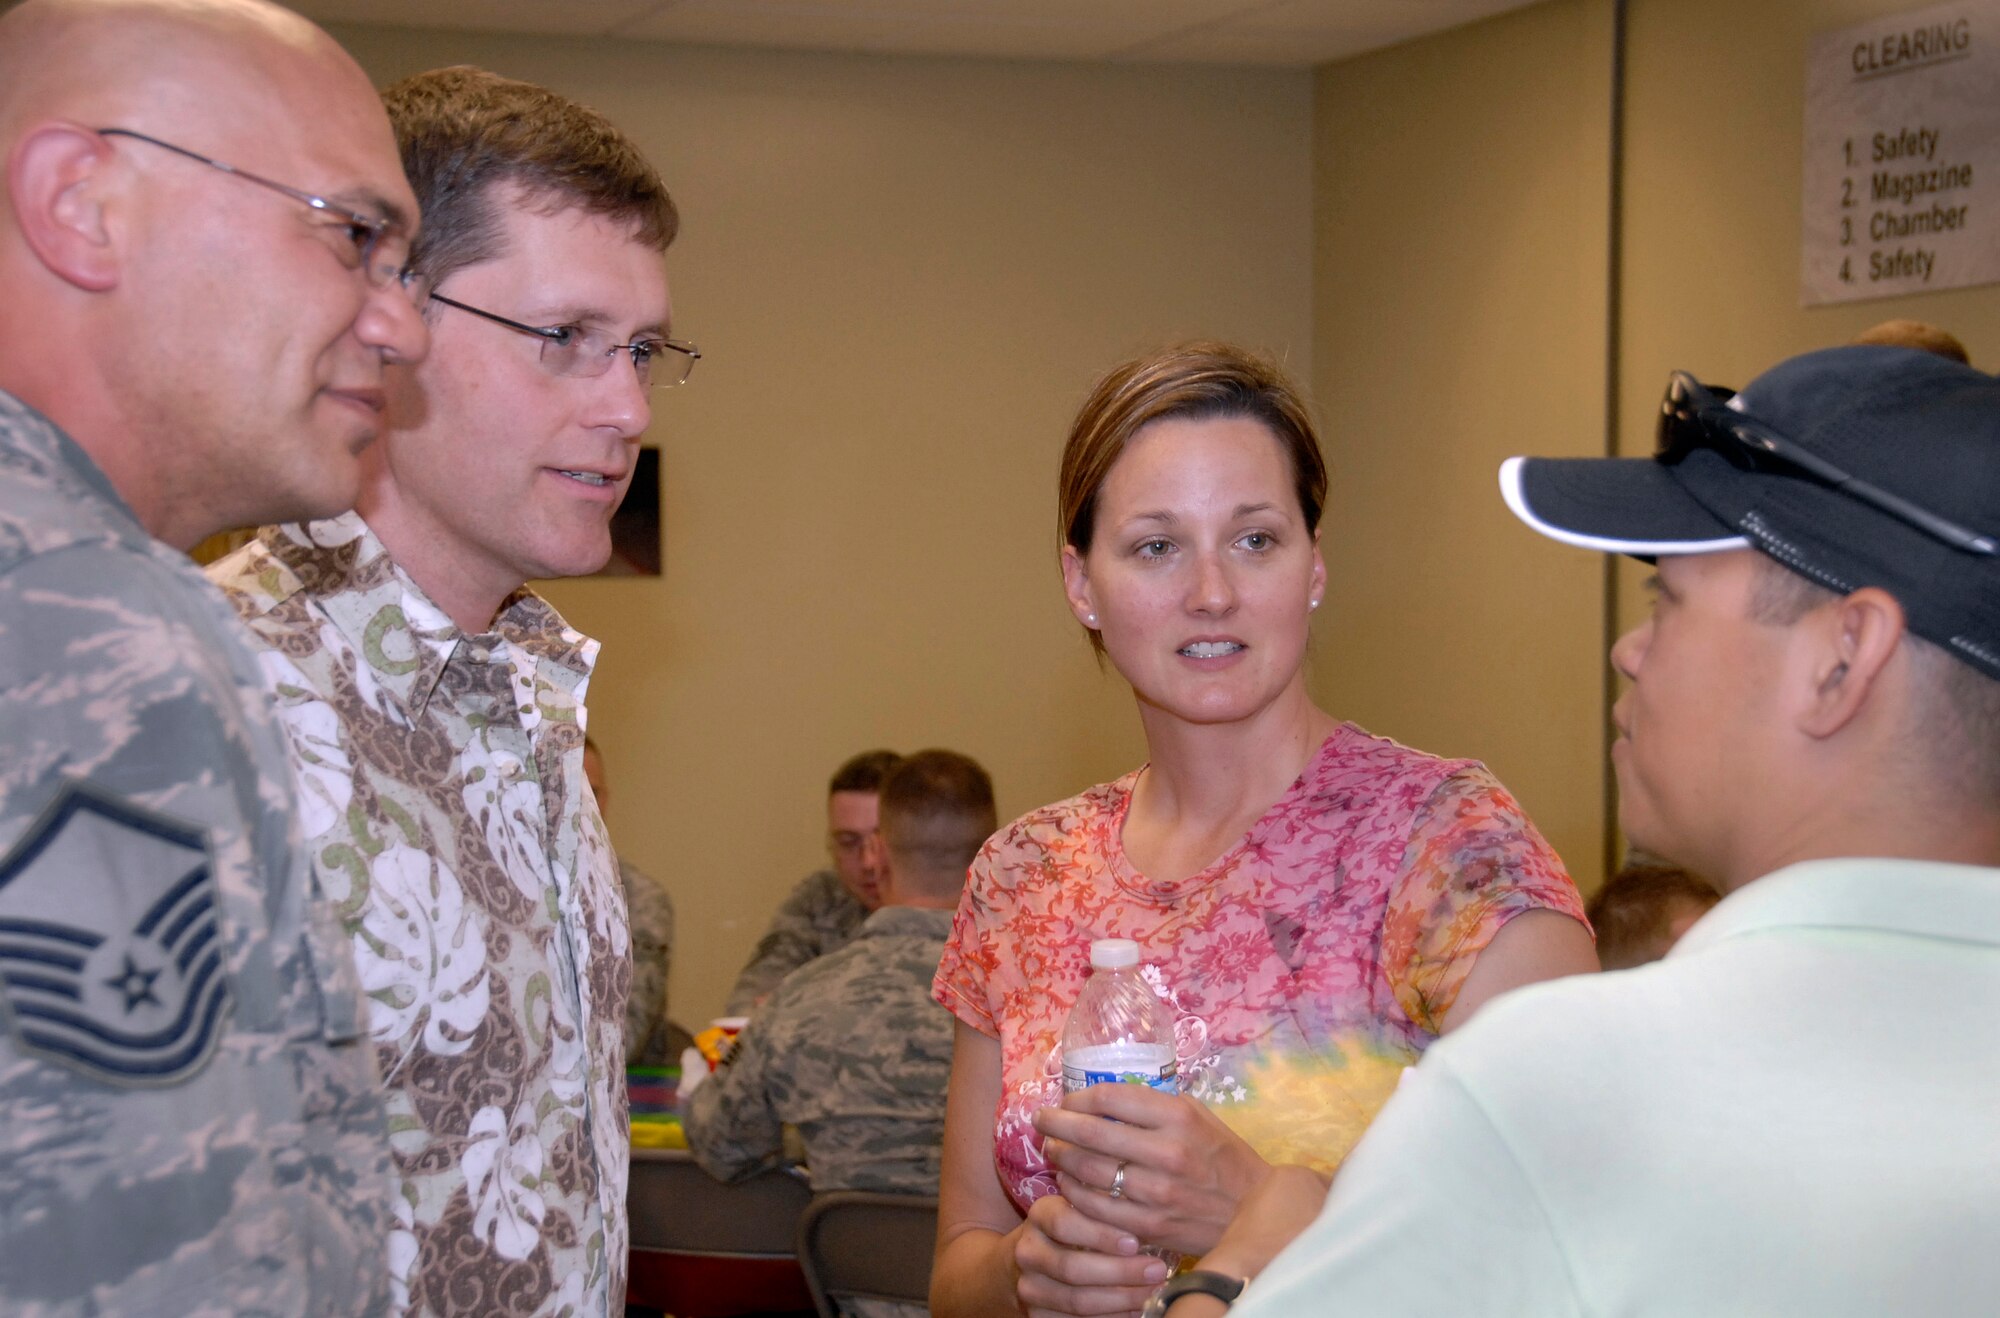 Members of the Oregon Air National Guard, friends and family met on base for the lesbian, gay, bisexual, transgender (LGBT) potluck June 8, 2013. This event, a first for the Air National Guard, was designed to create a bridge in the military community. (from left to right in photo) Master Sgt. David Brunstad, Darin Brunstad, Maj. Lisa Scott and Staff Sgt. Ijigale Beltran. (Air National Guard photo by Staff Sgt. Brandon Boyd, 142nd Fighter Wing Public Affairs)   